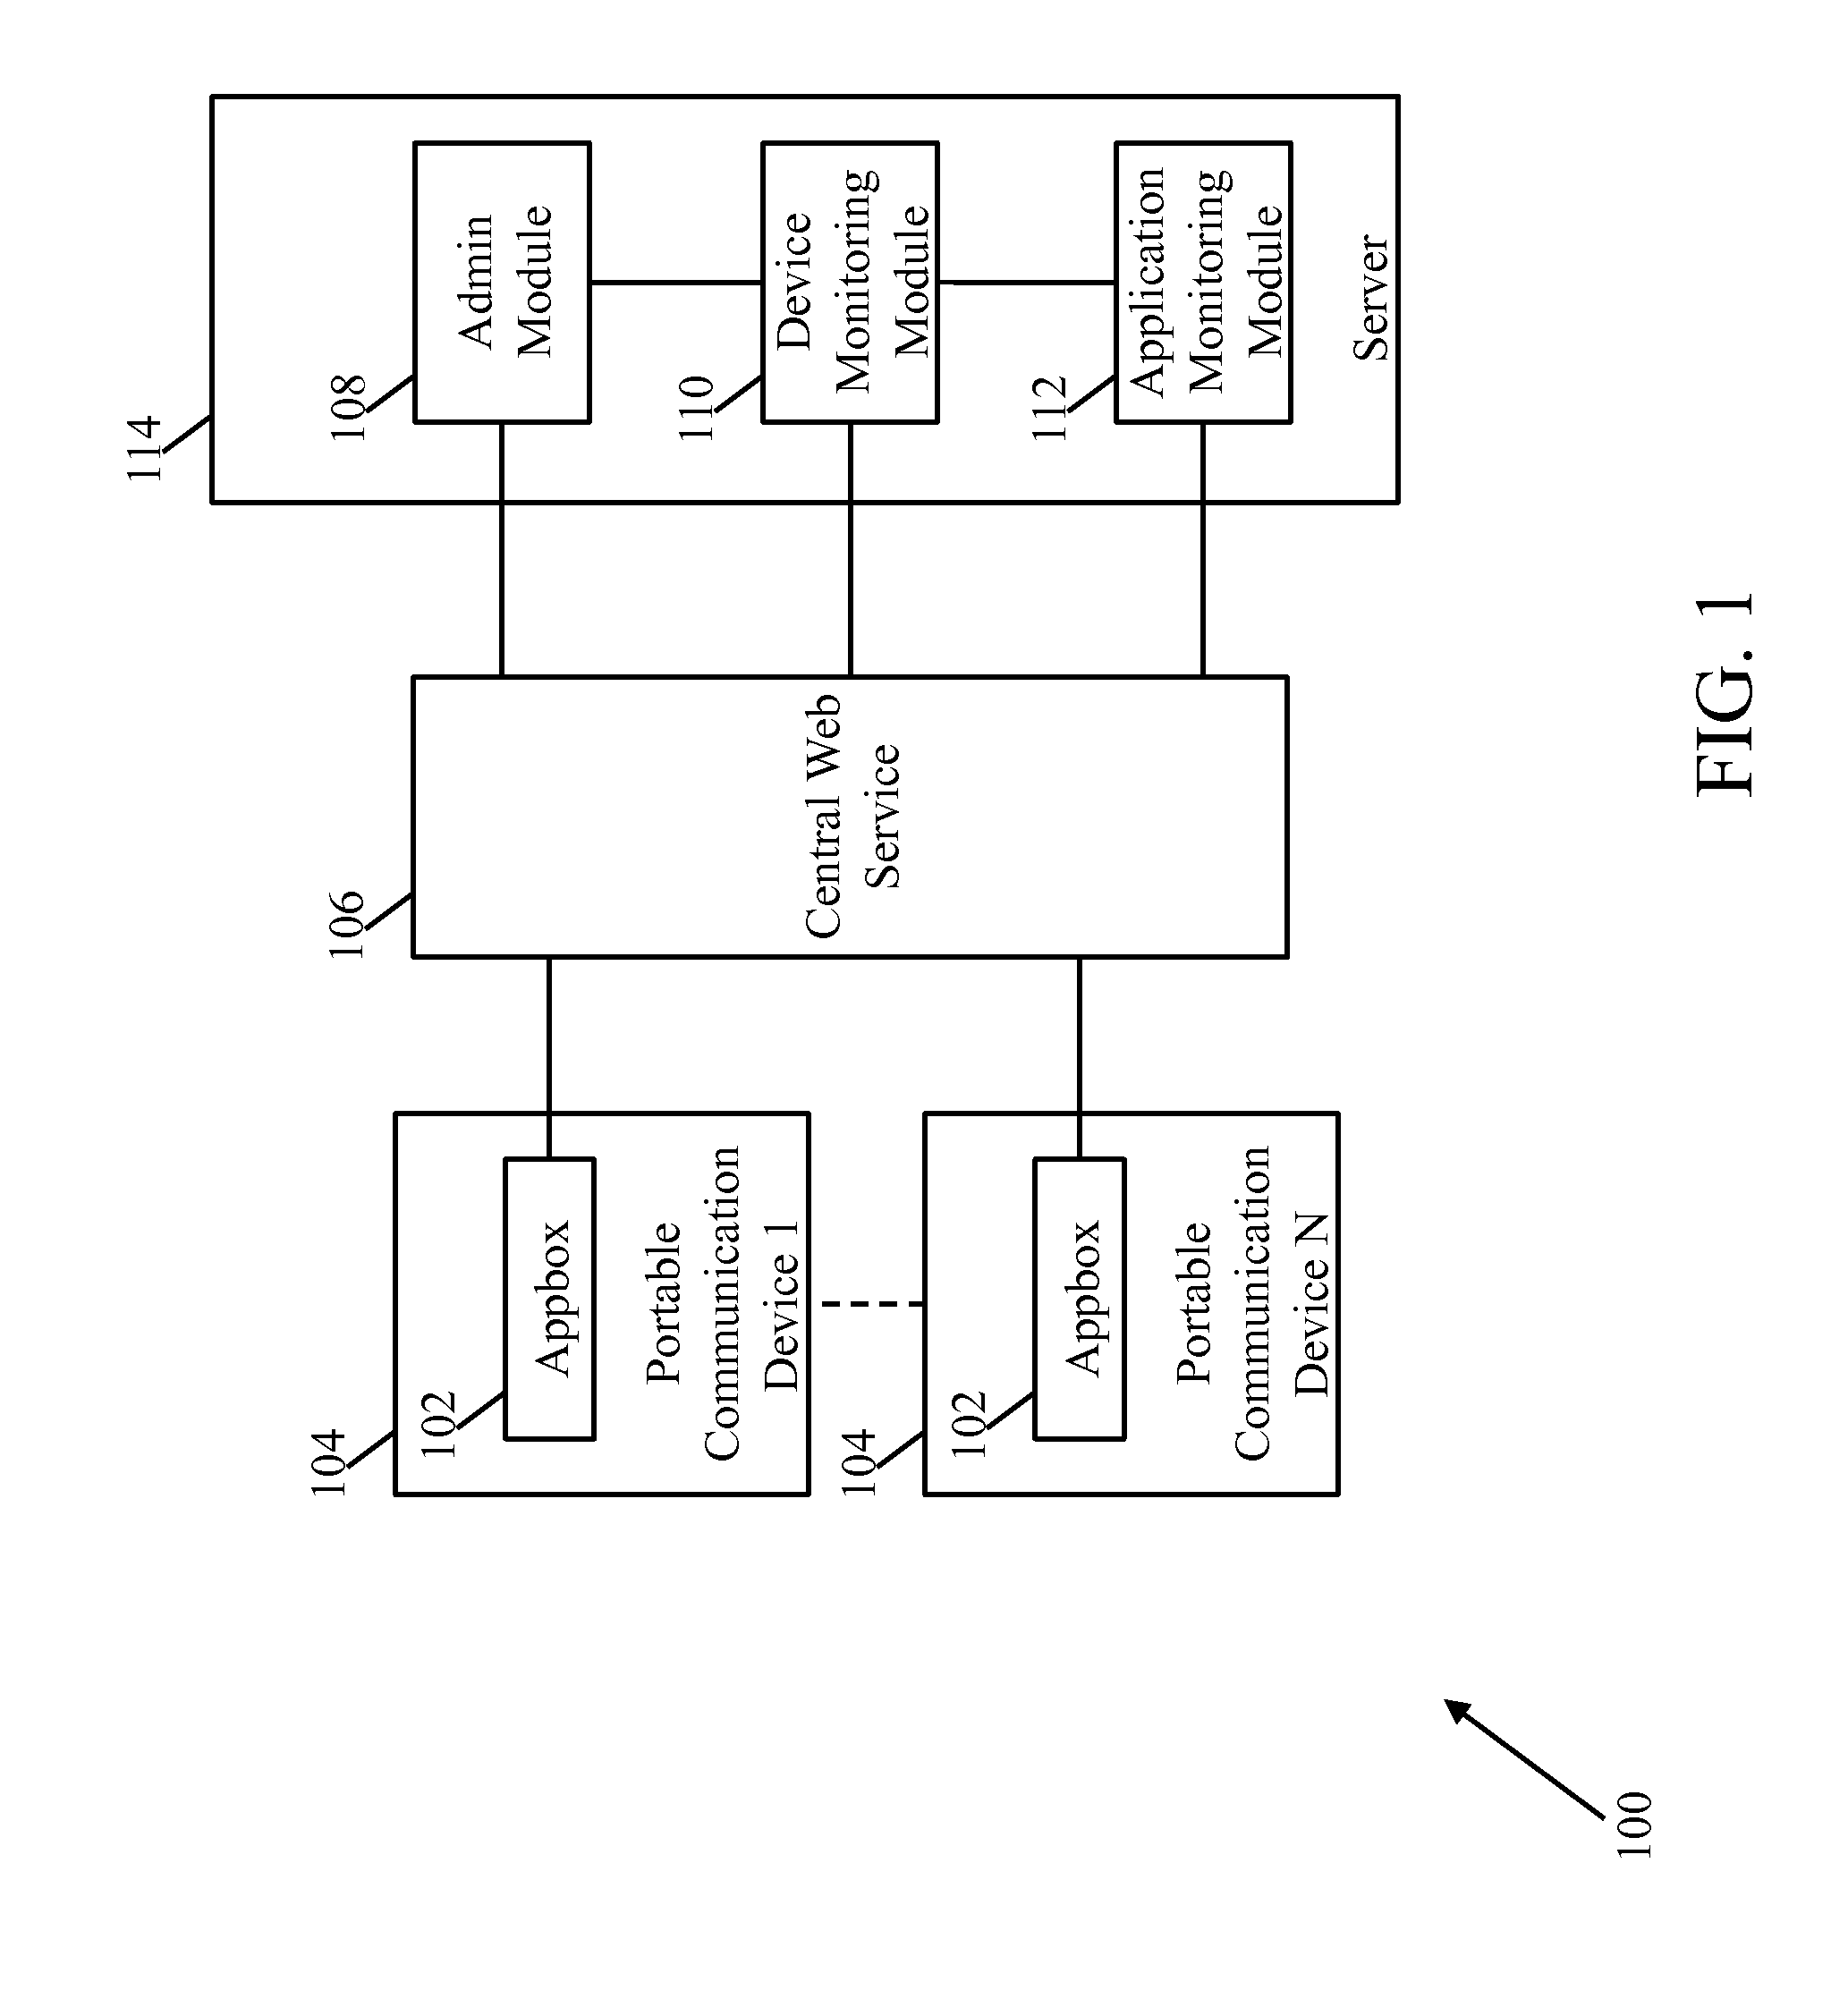 System and method for securely managing enterprise related applications and data on portable communication devices